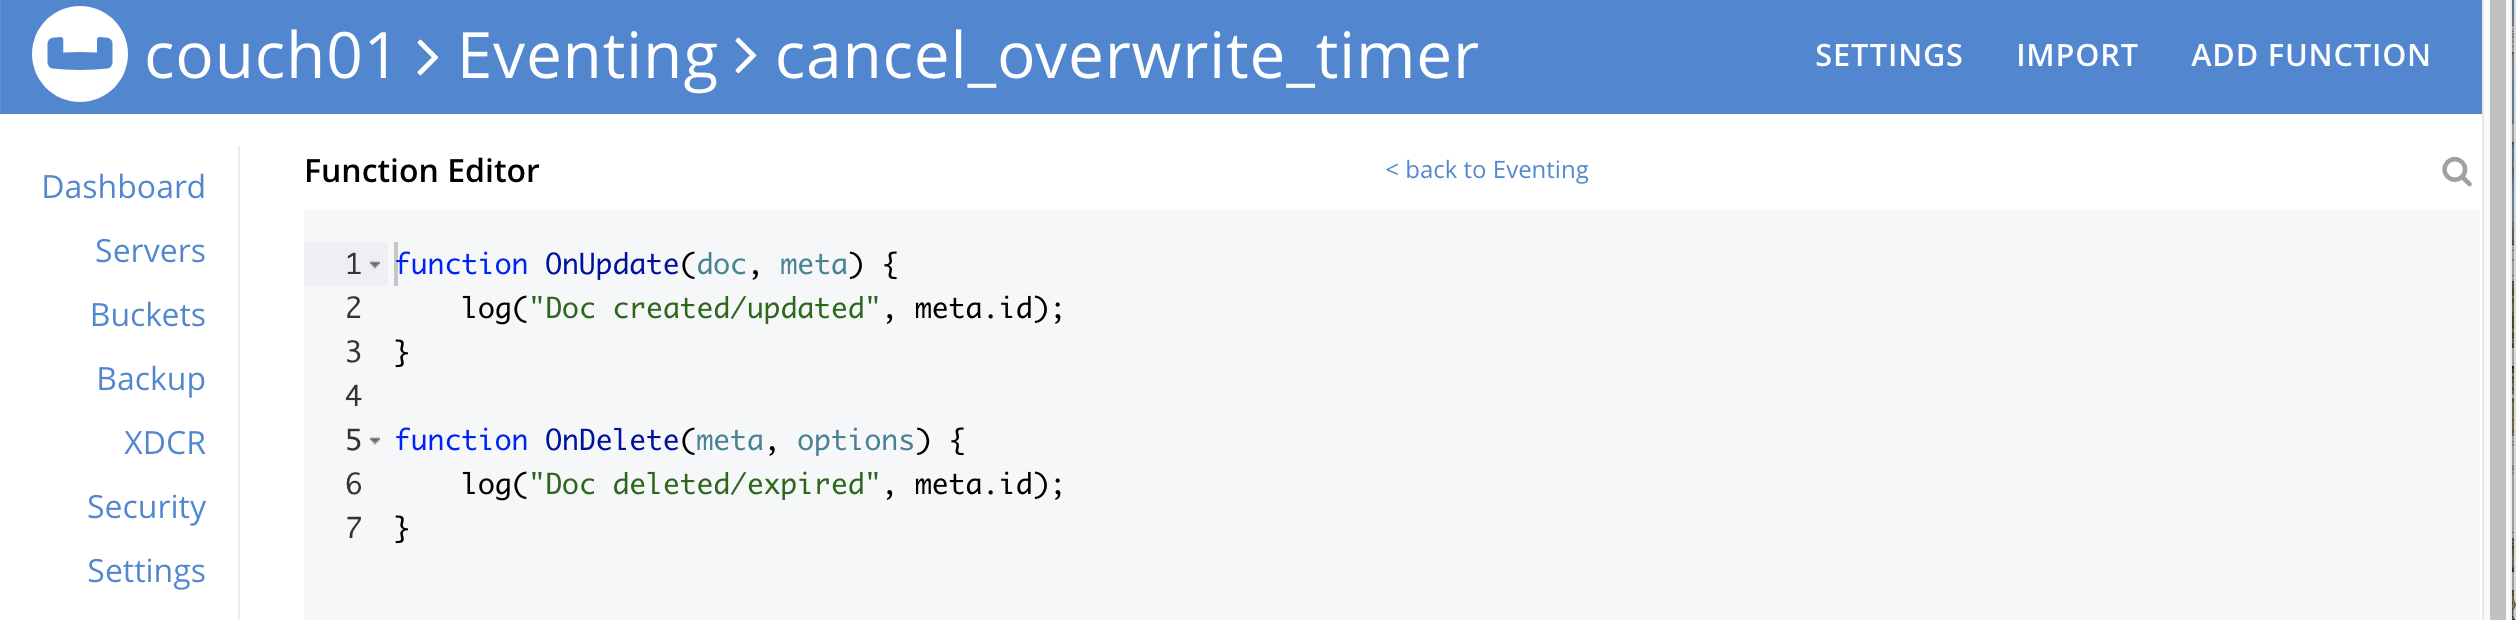 cancel overwrite timer 02 editor with default